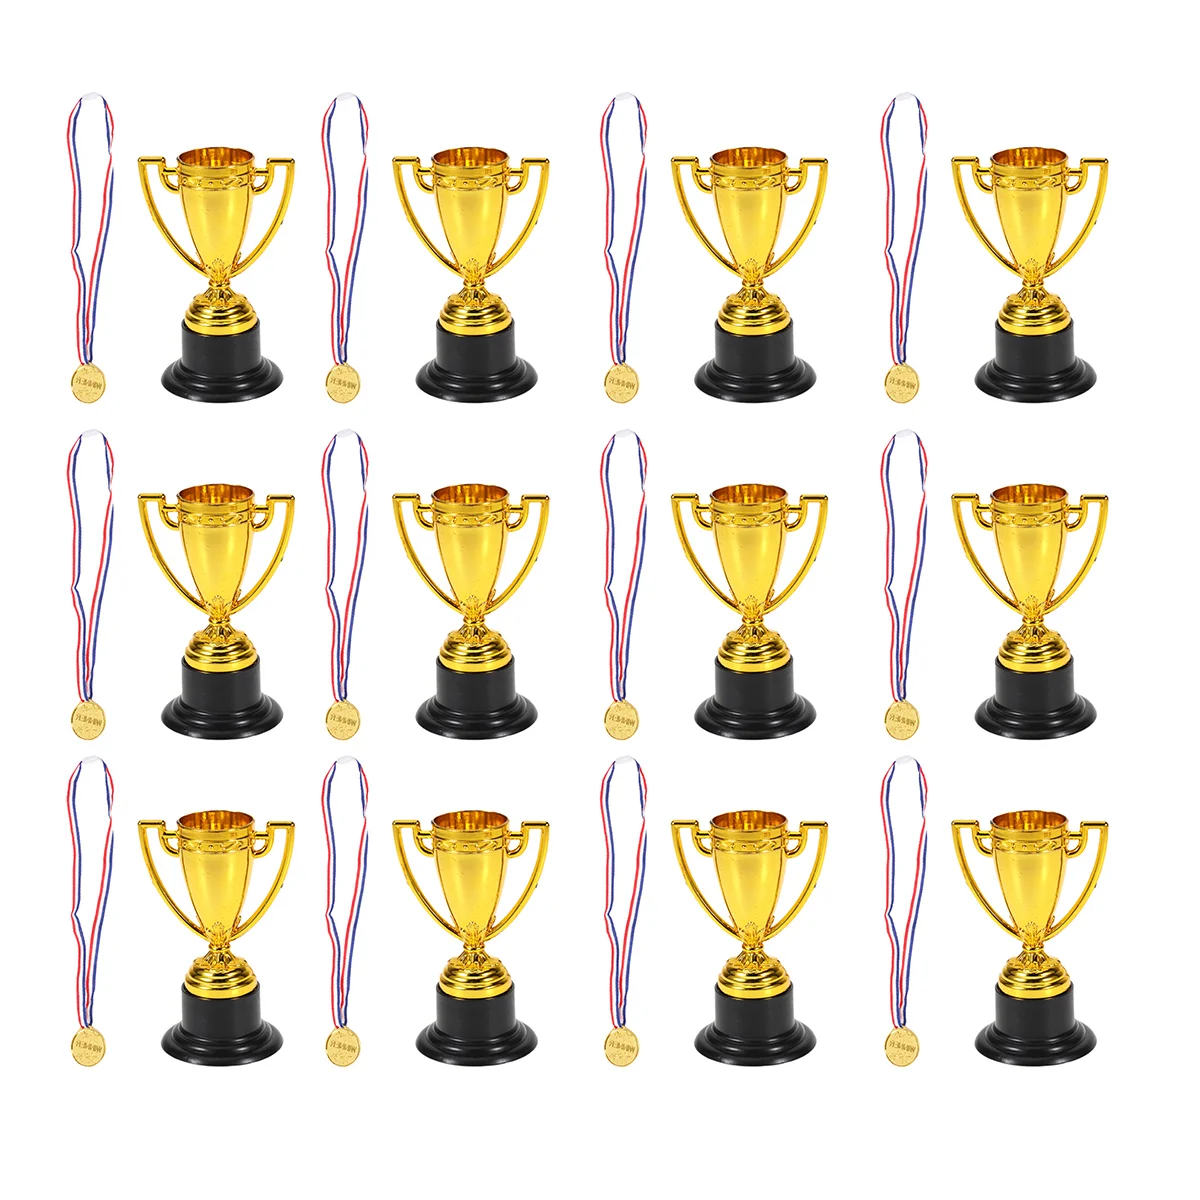 

Trophy Award Kids Trophies Cup Competitions Party Plasticbaseball Football Favor Medal Troph Reward Medals Winner Golden Gold